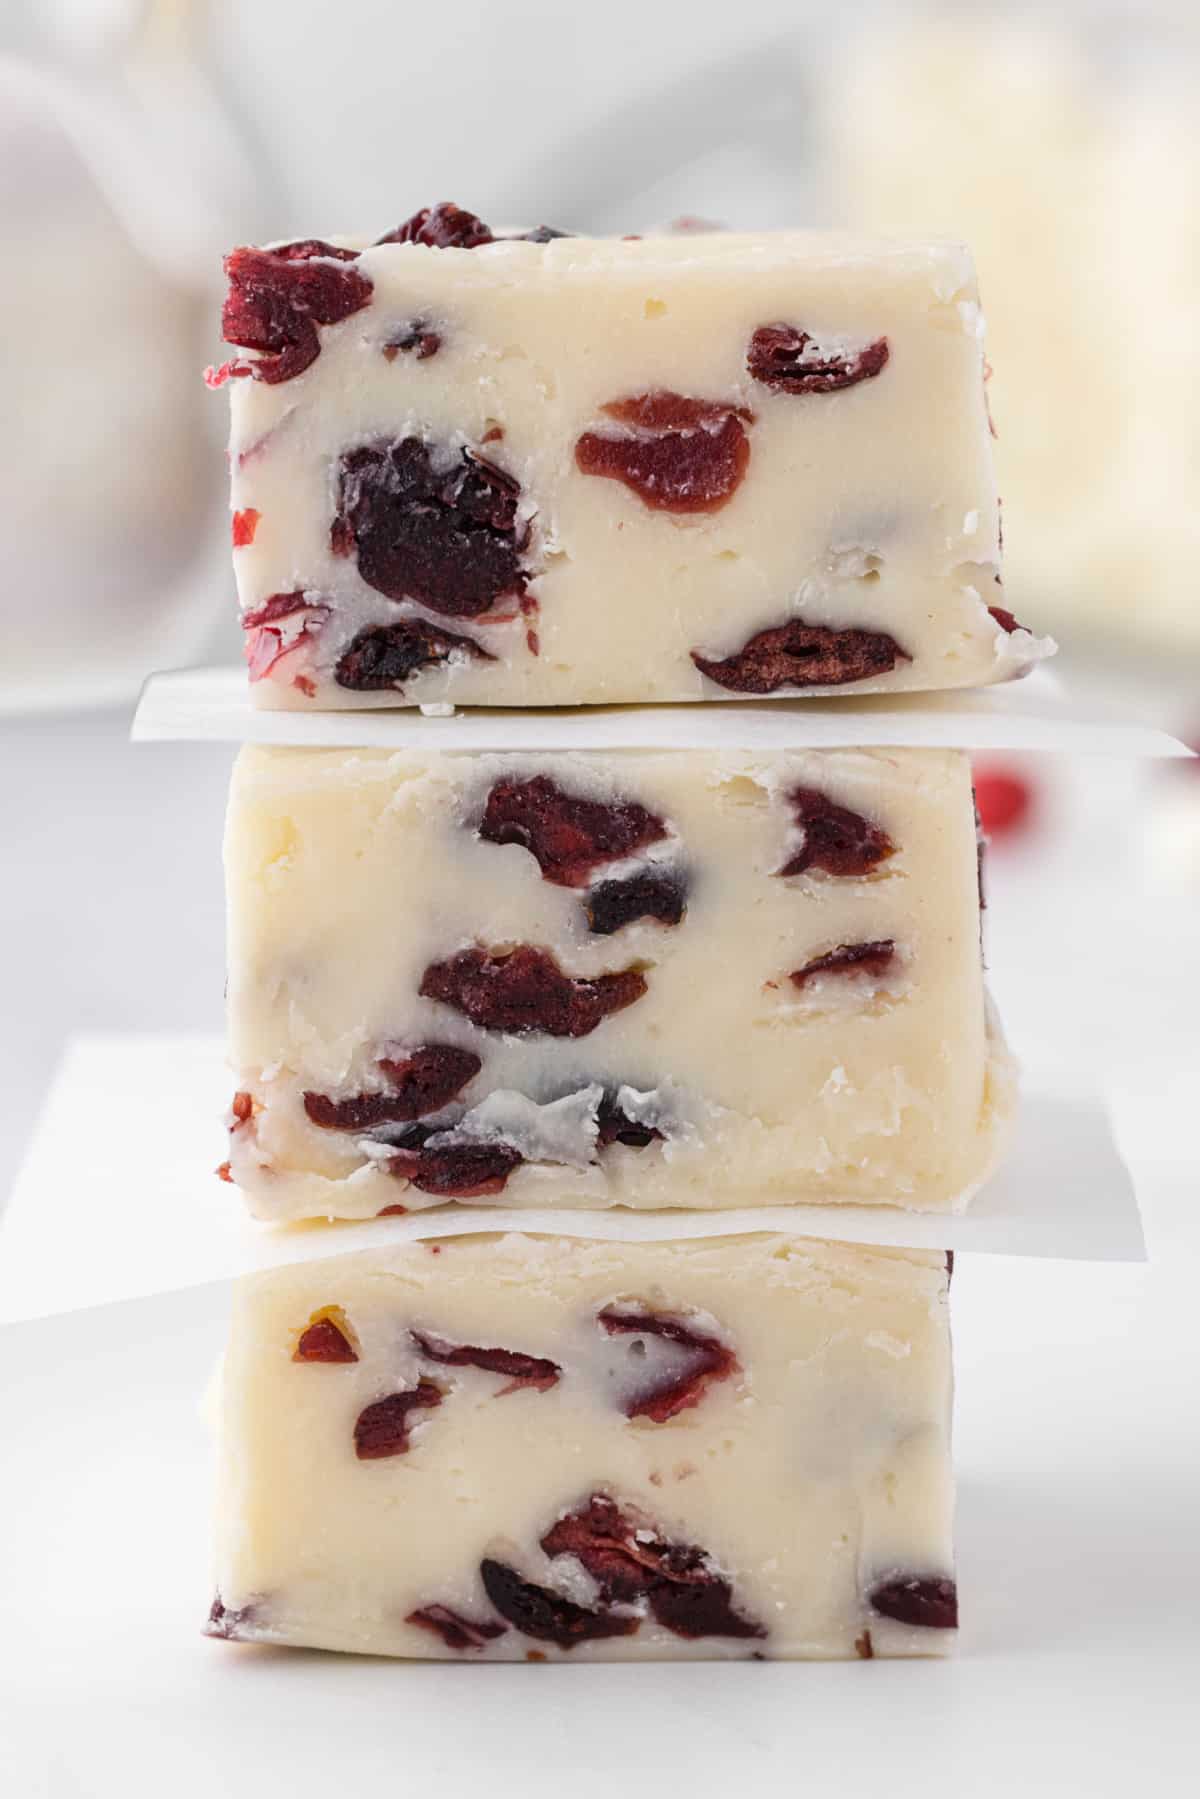 3 pieces of stacked white chocolate fudge